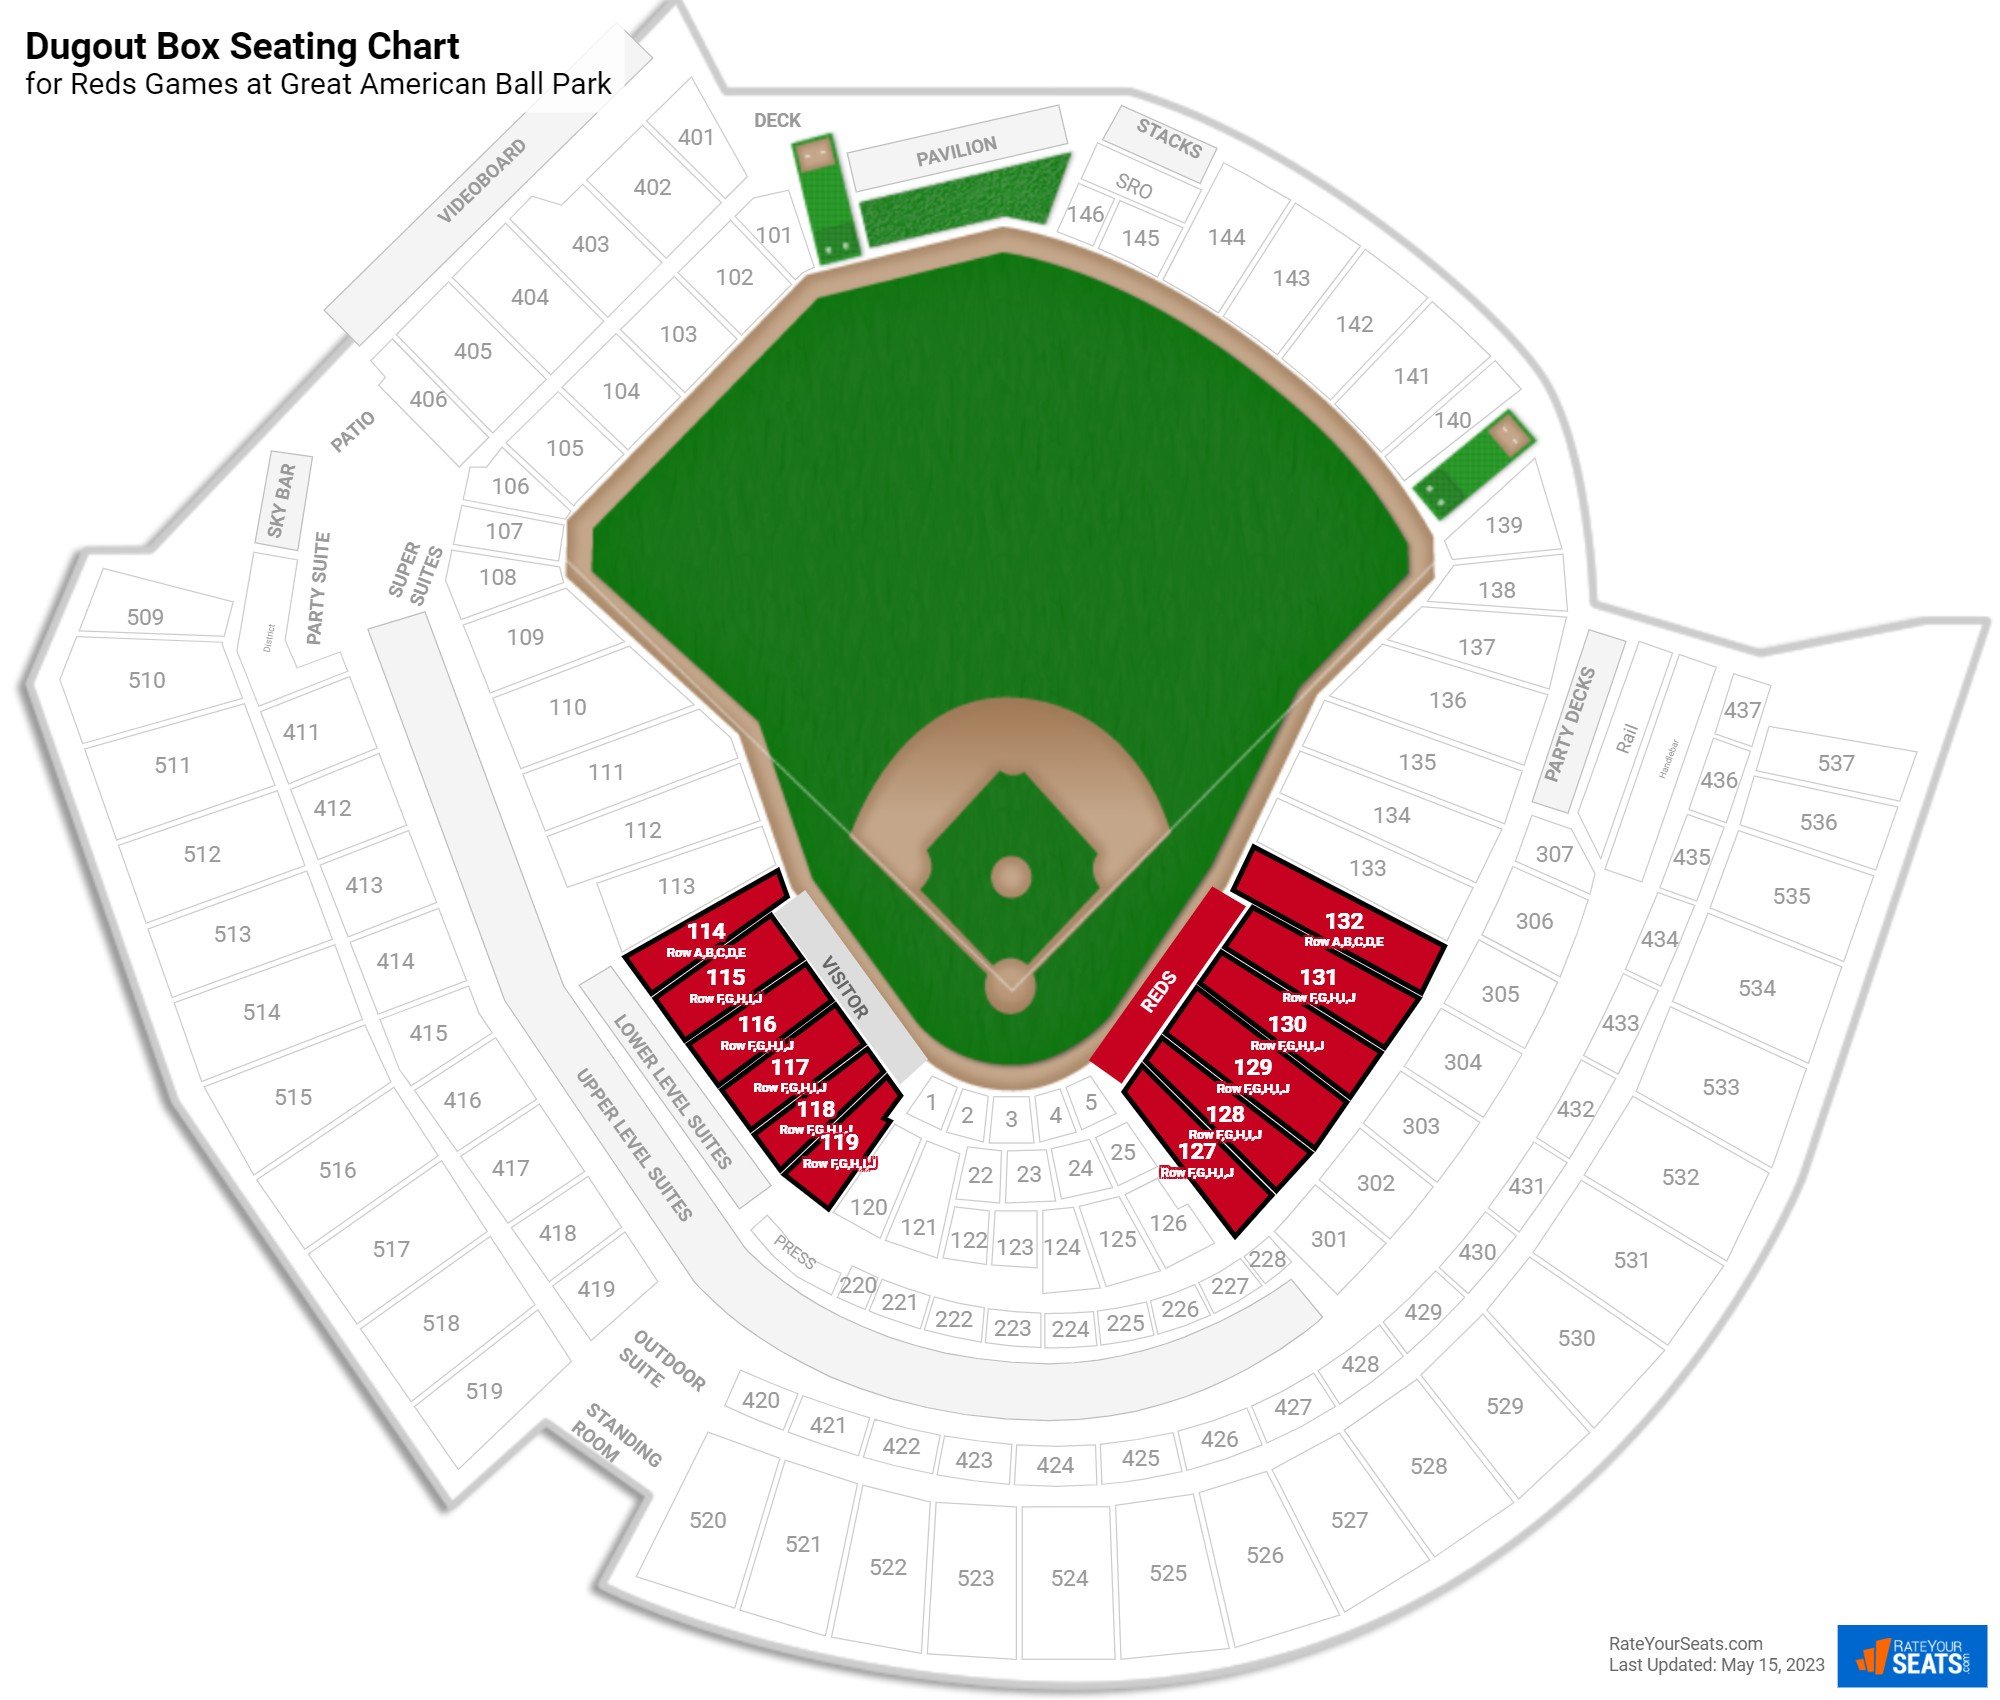 Reds Dugout Box Seating Chart at Great American Ball Park